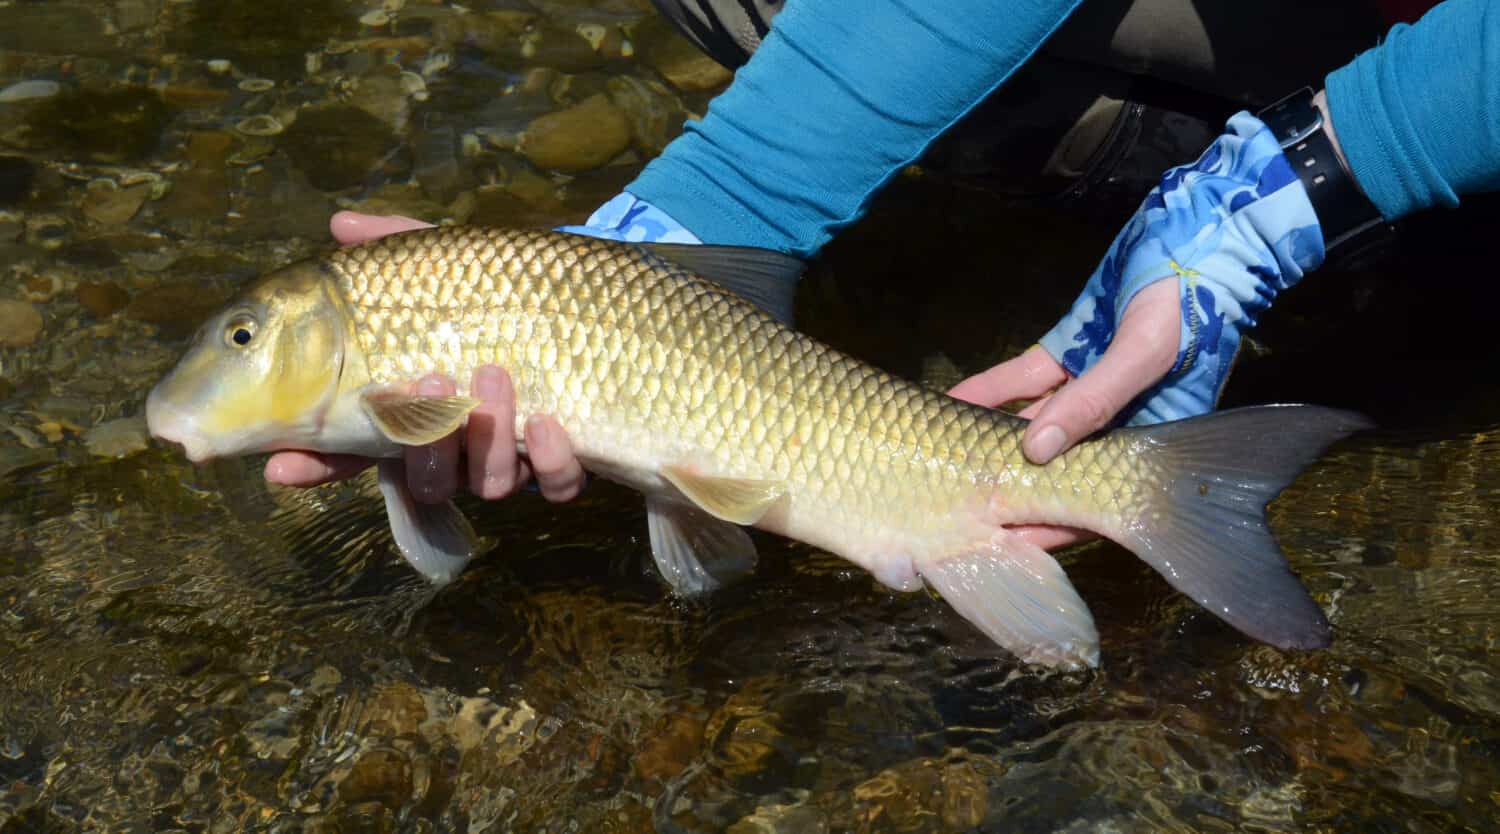 A large female golden redhorse fish being released back into the river